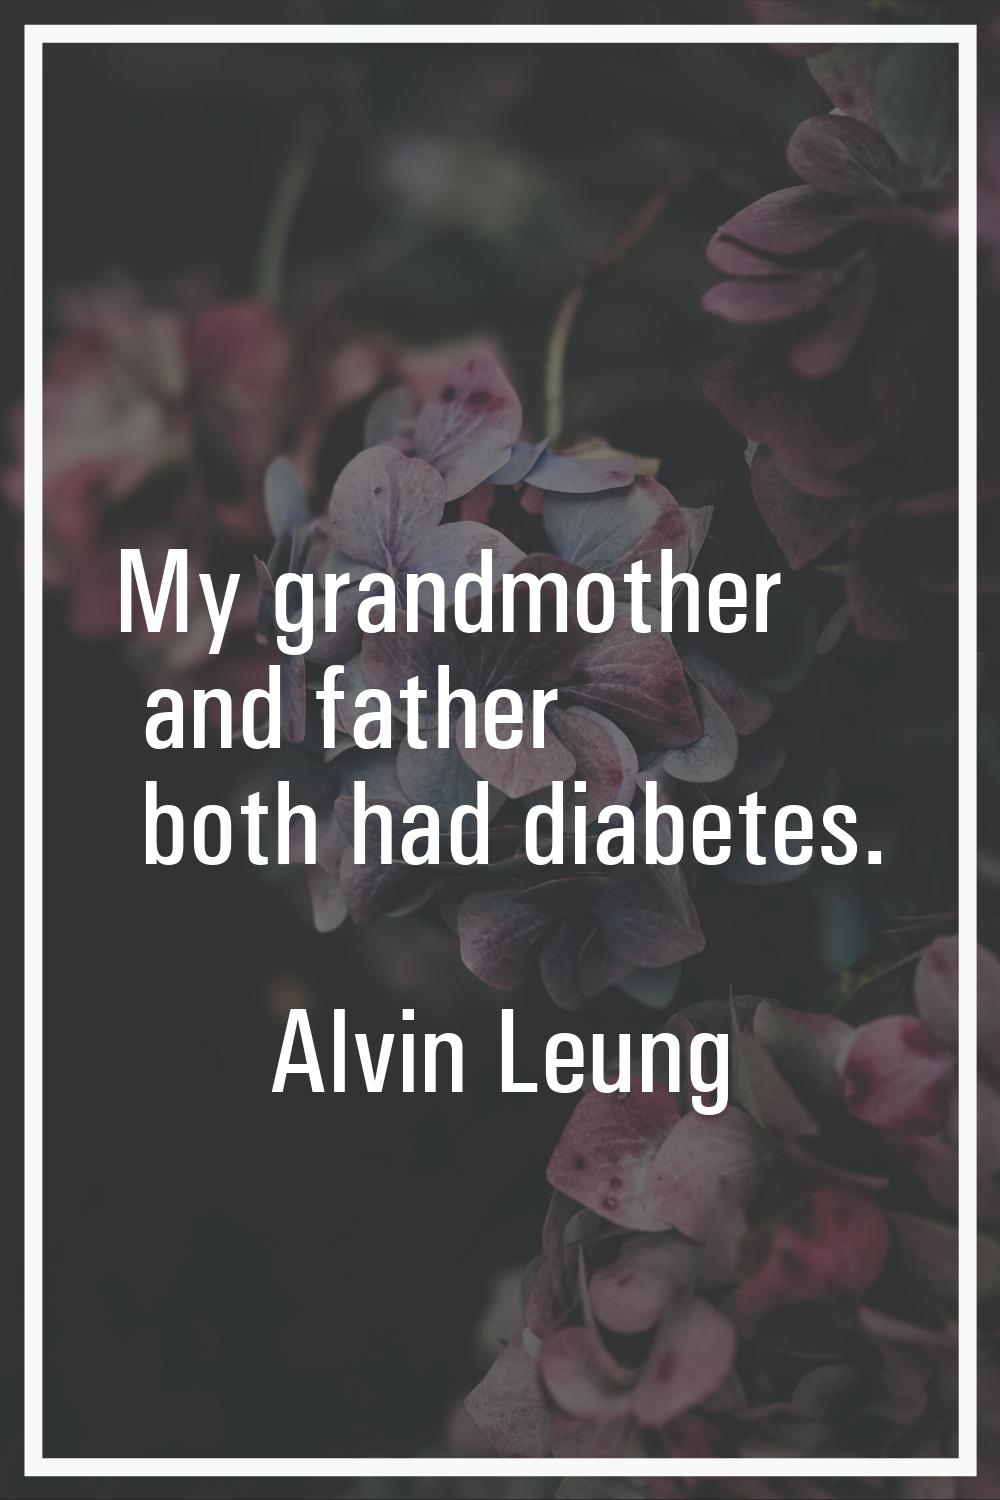 My grandmother and father both had diabetes.